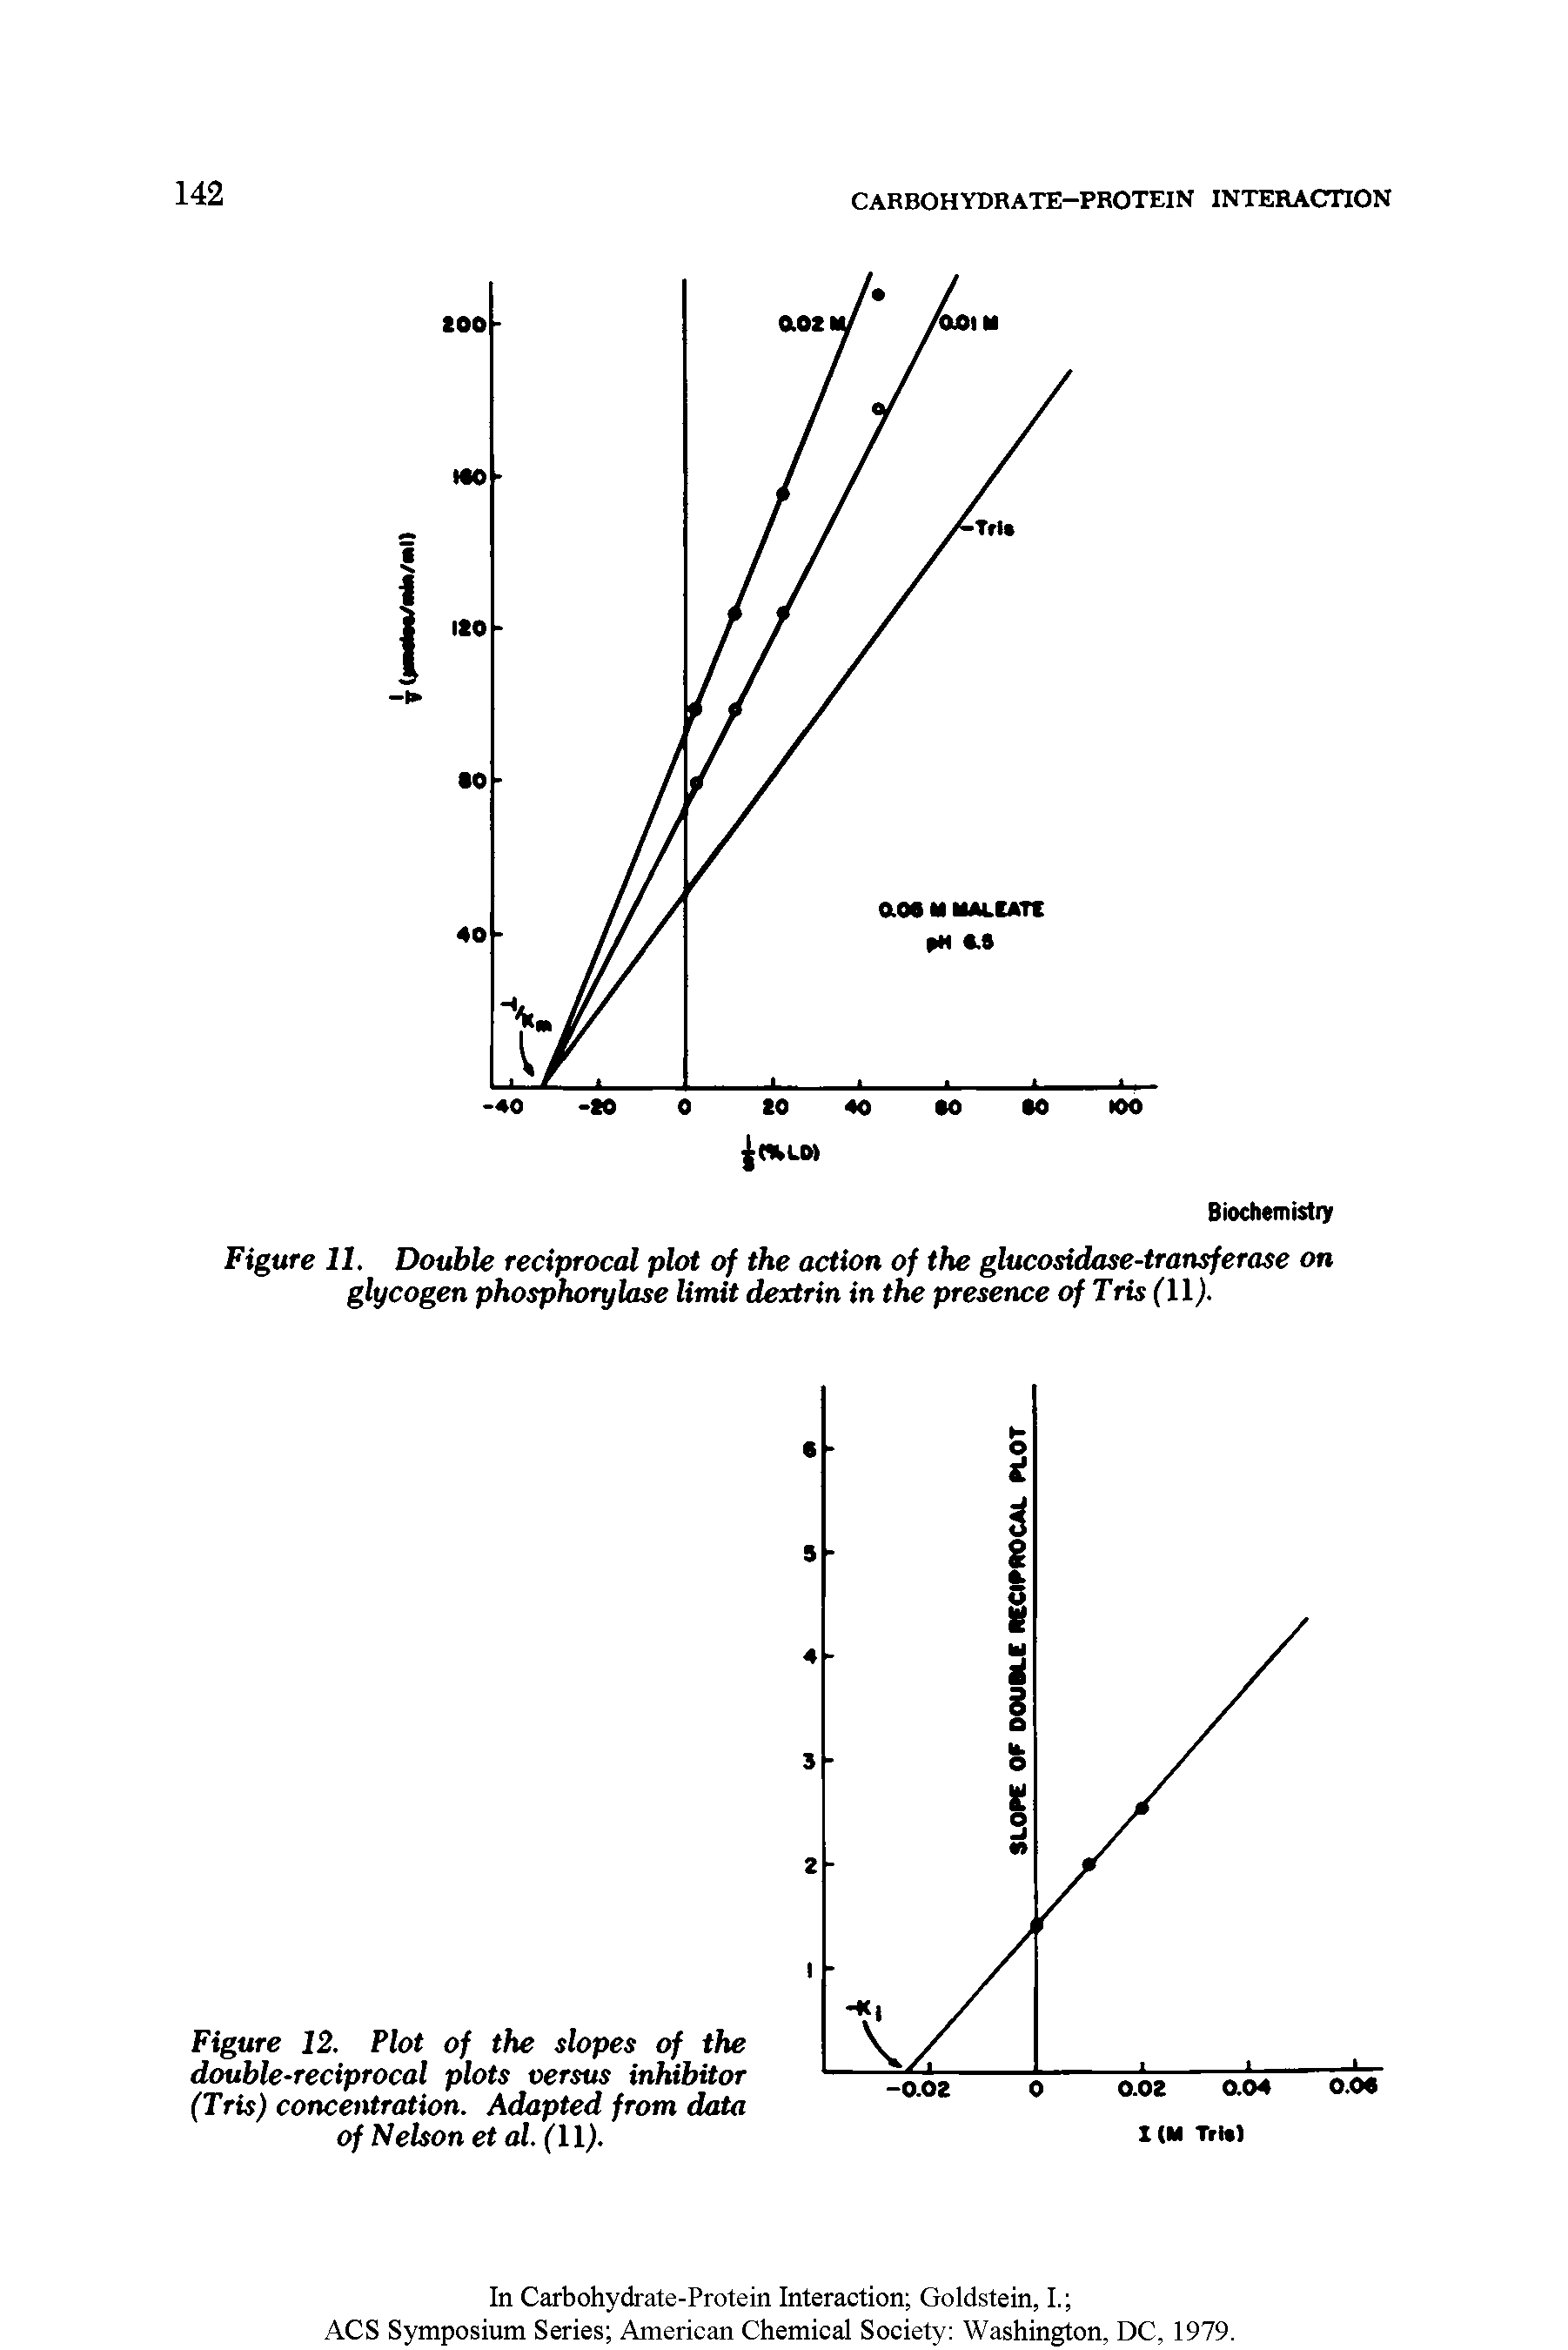 Figure 12. Plot of the slopes of the double-reciprocal plots versus inhibitor (Tris) concentration. Adapted from data of Nelson et al. ( ll).